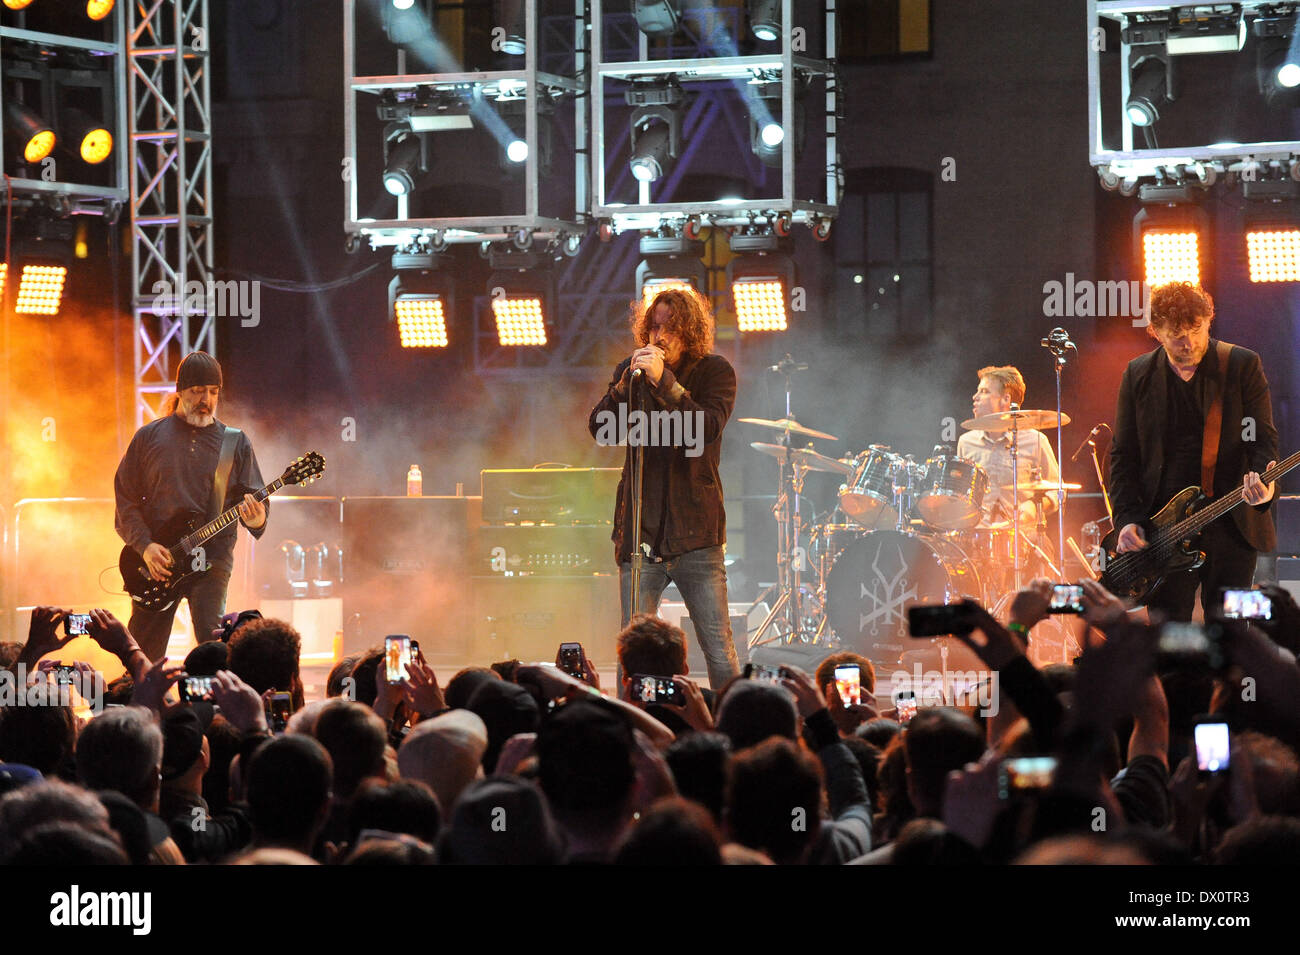 Austin, Texas, USA. 14th Mar, 2014. (L-R) Kim Thayil, Chris Cornell, Matt Cameron and Ben Shepherd of Soundgarden perform in concert at the Guitar Center Direct TV live stream show from a roof top party during South By Southwest (SXSW) on March 14, 2014 in Austin, Texas - USA (Photo by Manuel Nauta/NurPhoto) © Manuel Nauta/NurPhoto/ZUMAPRESS.com/Alamy Live News Stock Photo